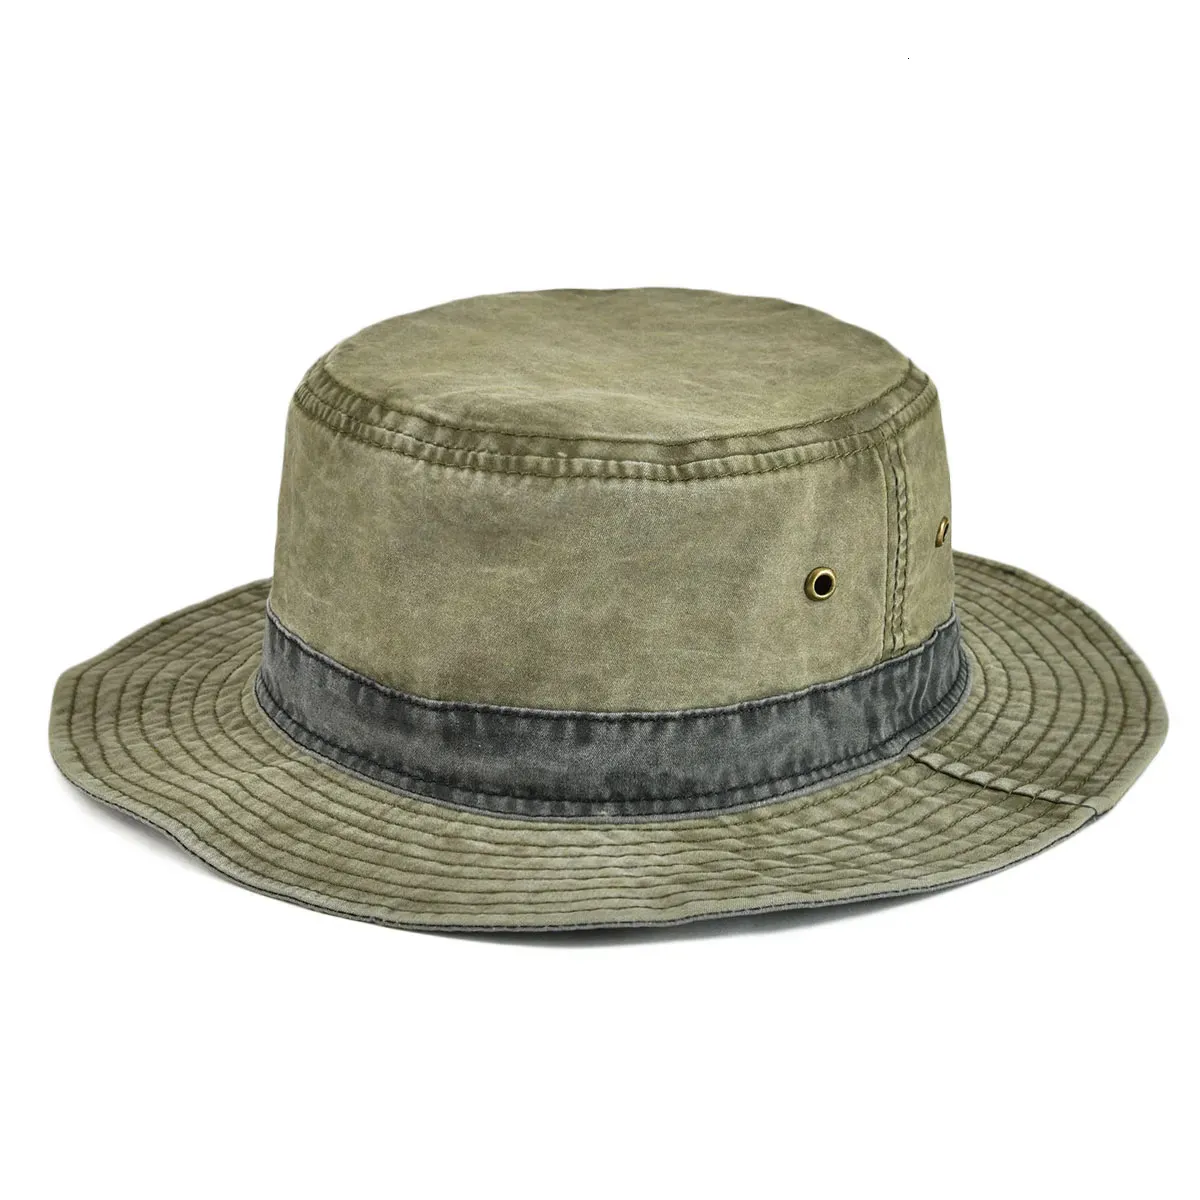 VOBOOM Mens Bucket Hats Bob Summer Panama Outdoor Fishing Wide Brim Hat Sun  Protection Cap Hunting For Male Cotton 231229 From Nan05, $11.96